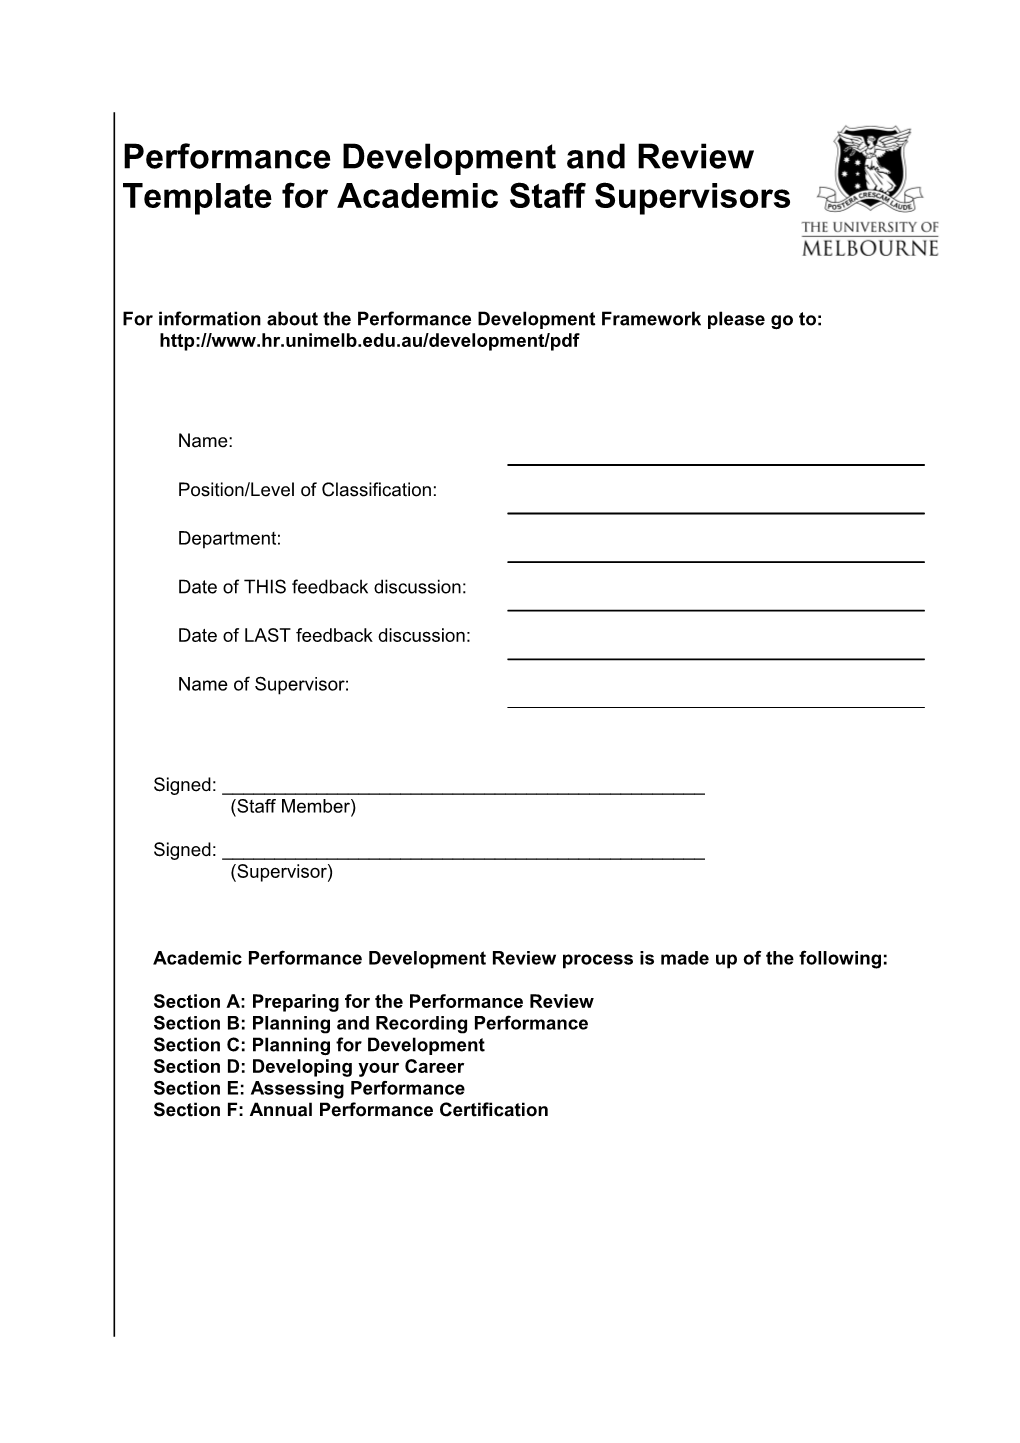 Performance Development and Review Template for Academic Staff Supervisors